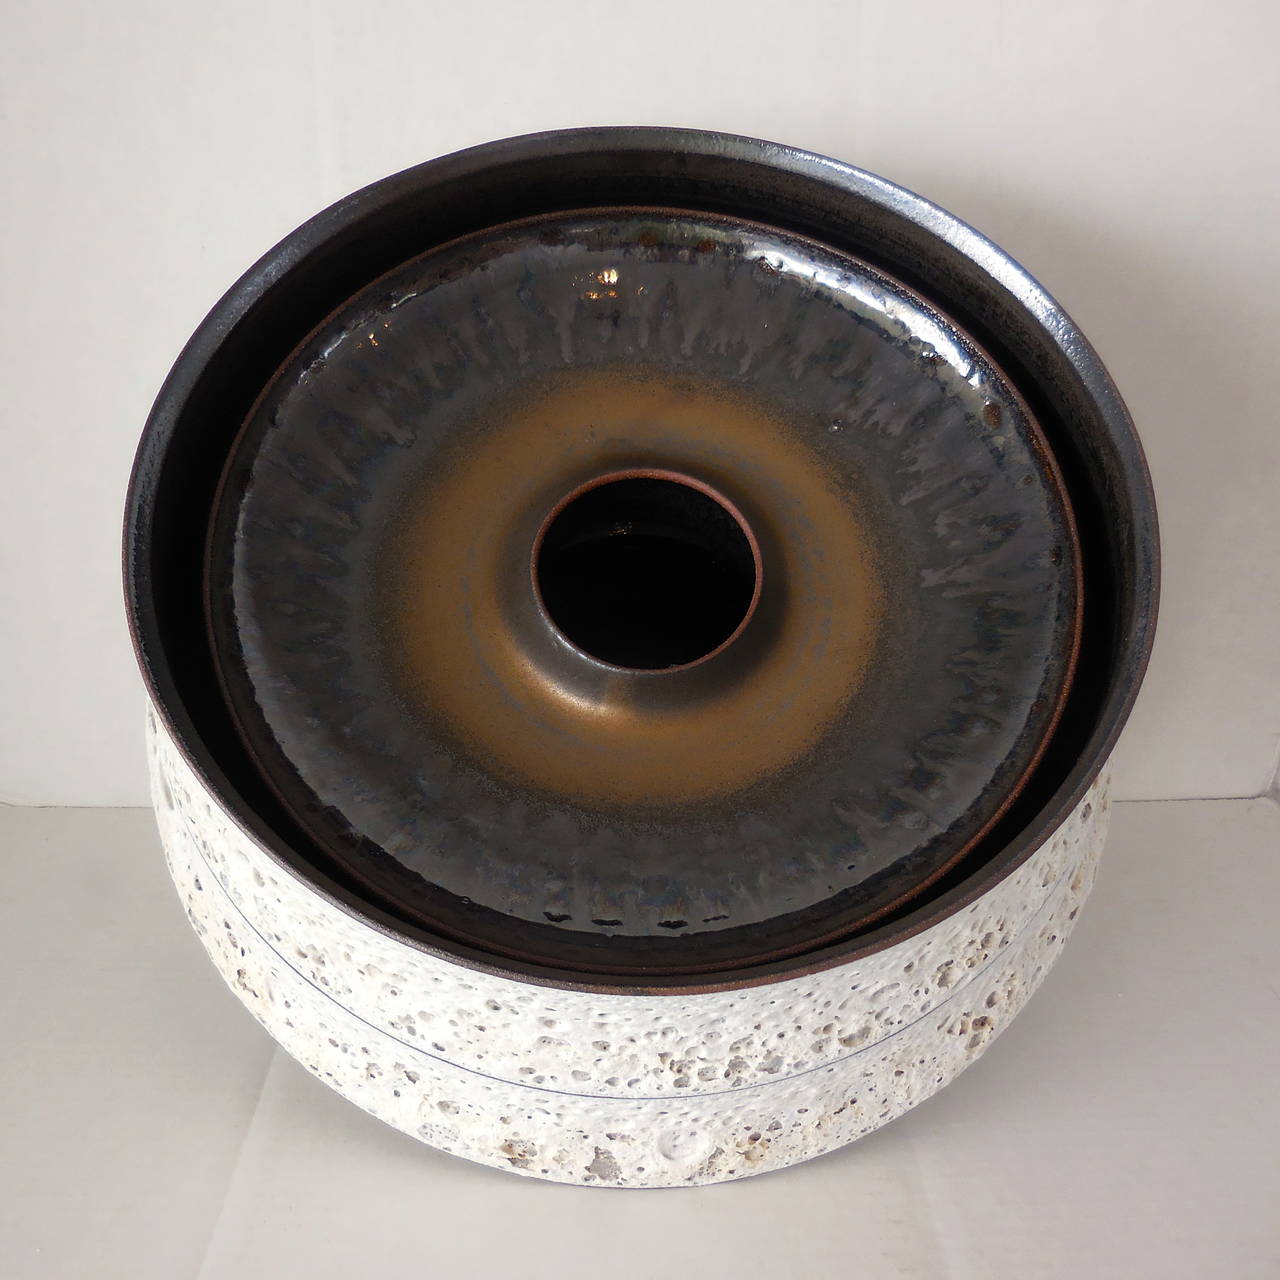 A truly spectacular, hand thrown double walled vessel by American artist Jeremy Briddell. This piece has a white 